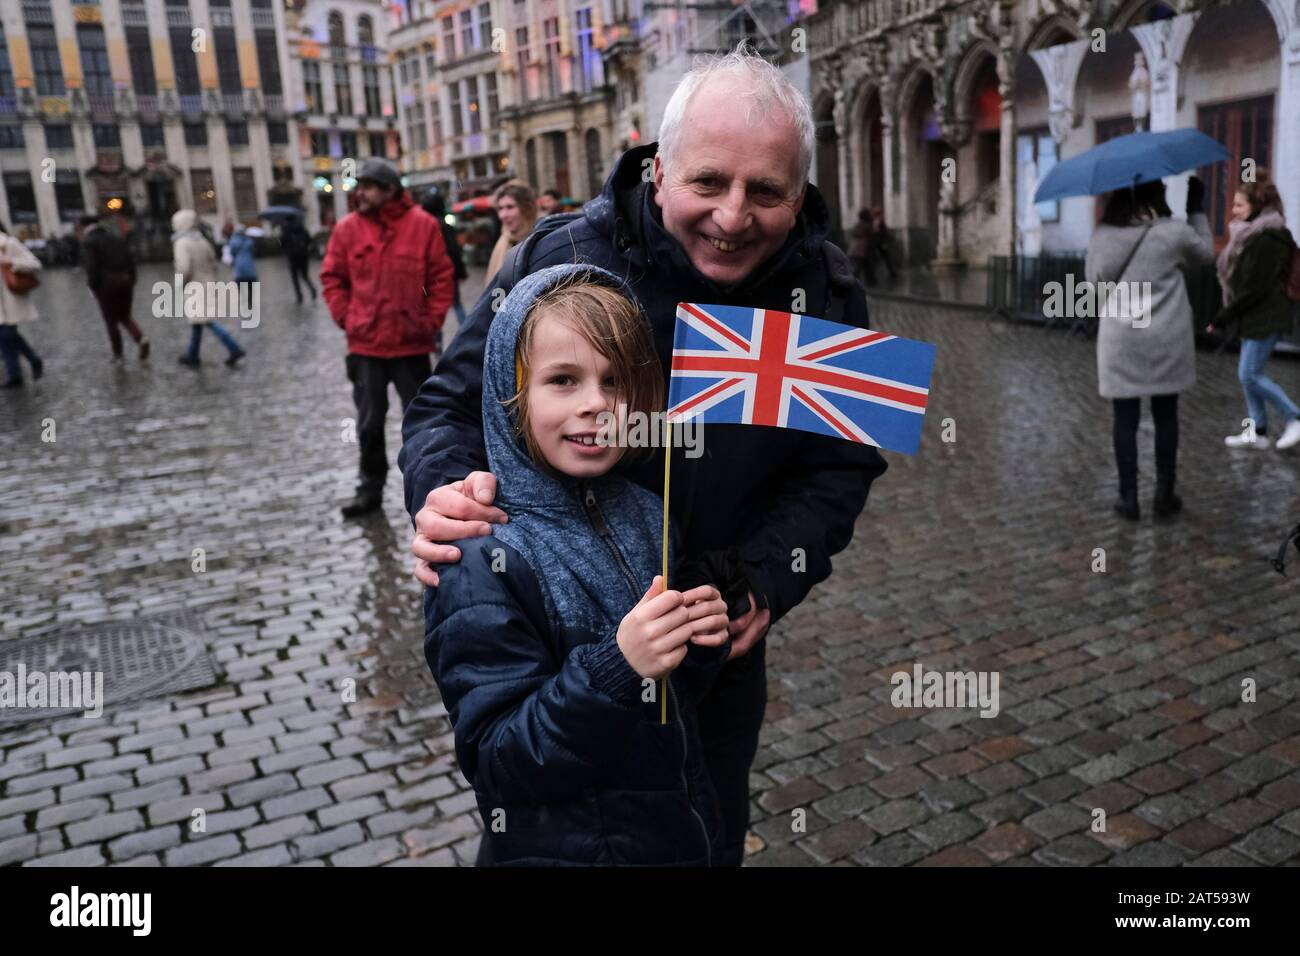 Brussels, Belgium. 30th Jan, 2020. A man holds a European flag and a Union Jack flag on the Grand Place during an event to underline its long friendship with the British. Credit: ALEXANDROS MICHAILIDIS/Alamy Live News Stock Photo